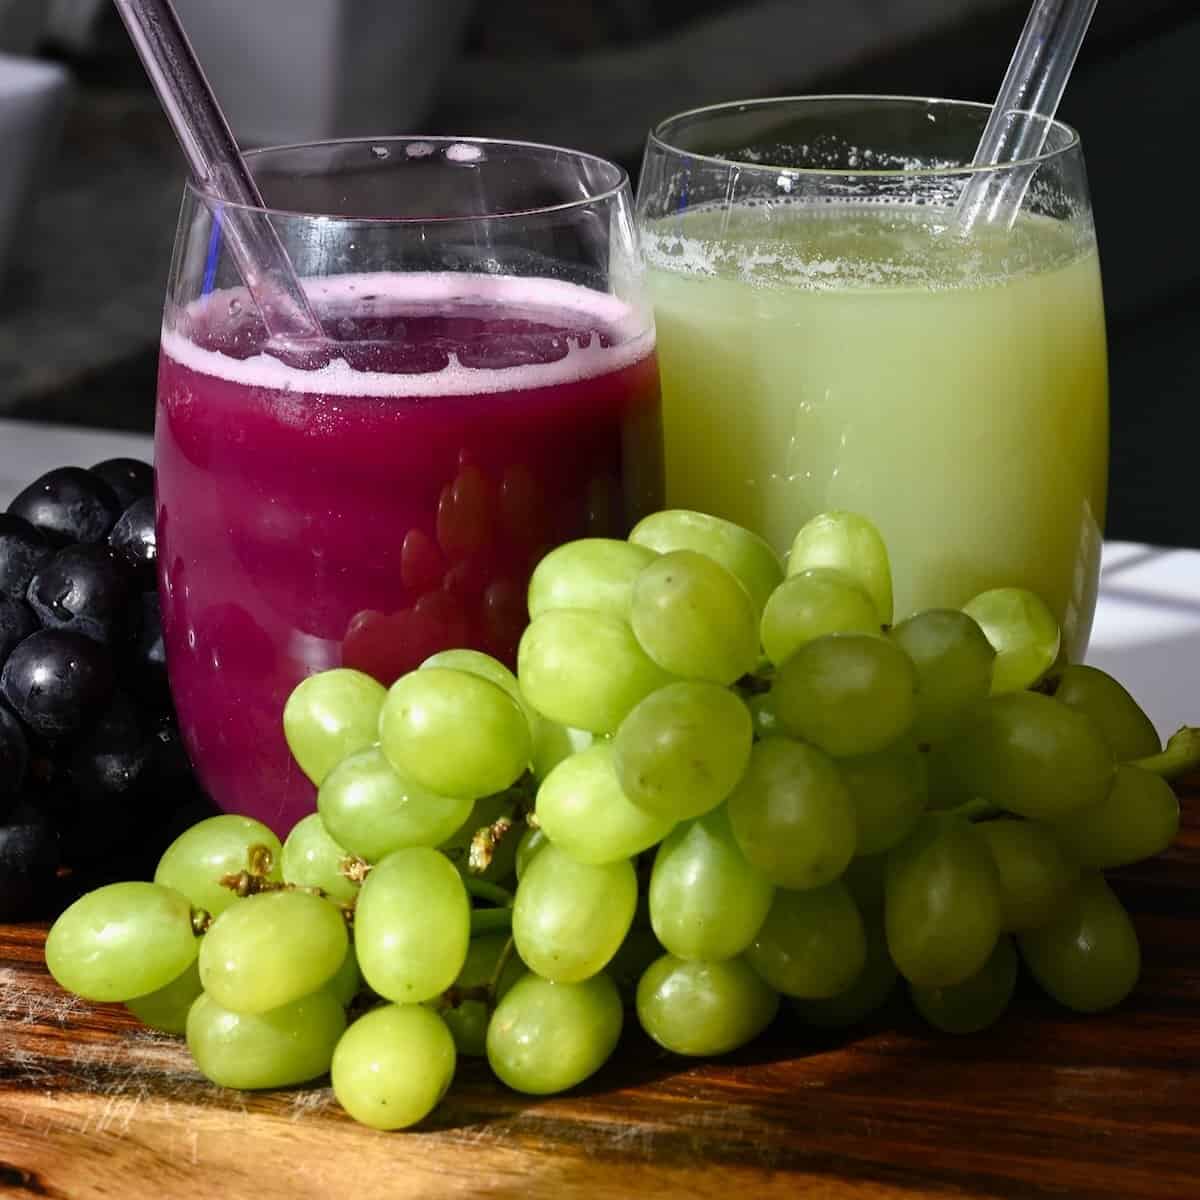 https://www.alphafoodie.com/wp-content/uploads/2022/03/How-to-Make-Grape-Juice-Square.jpeg